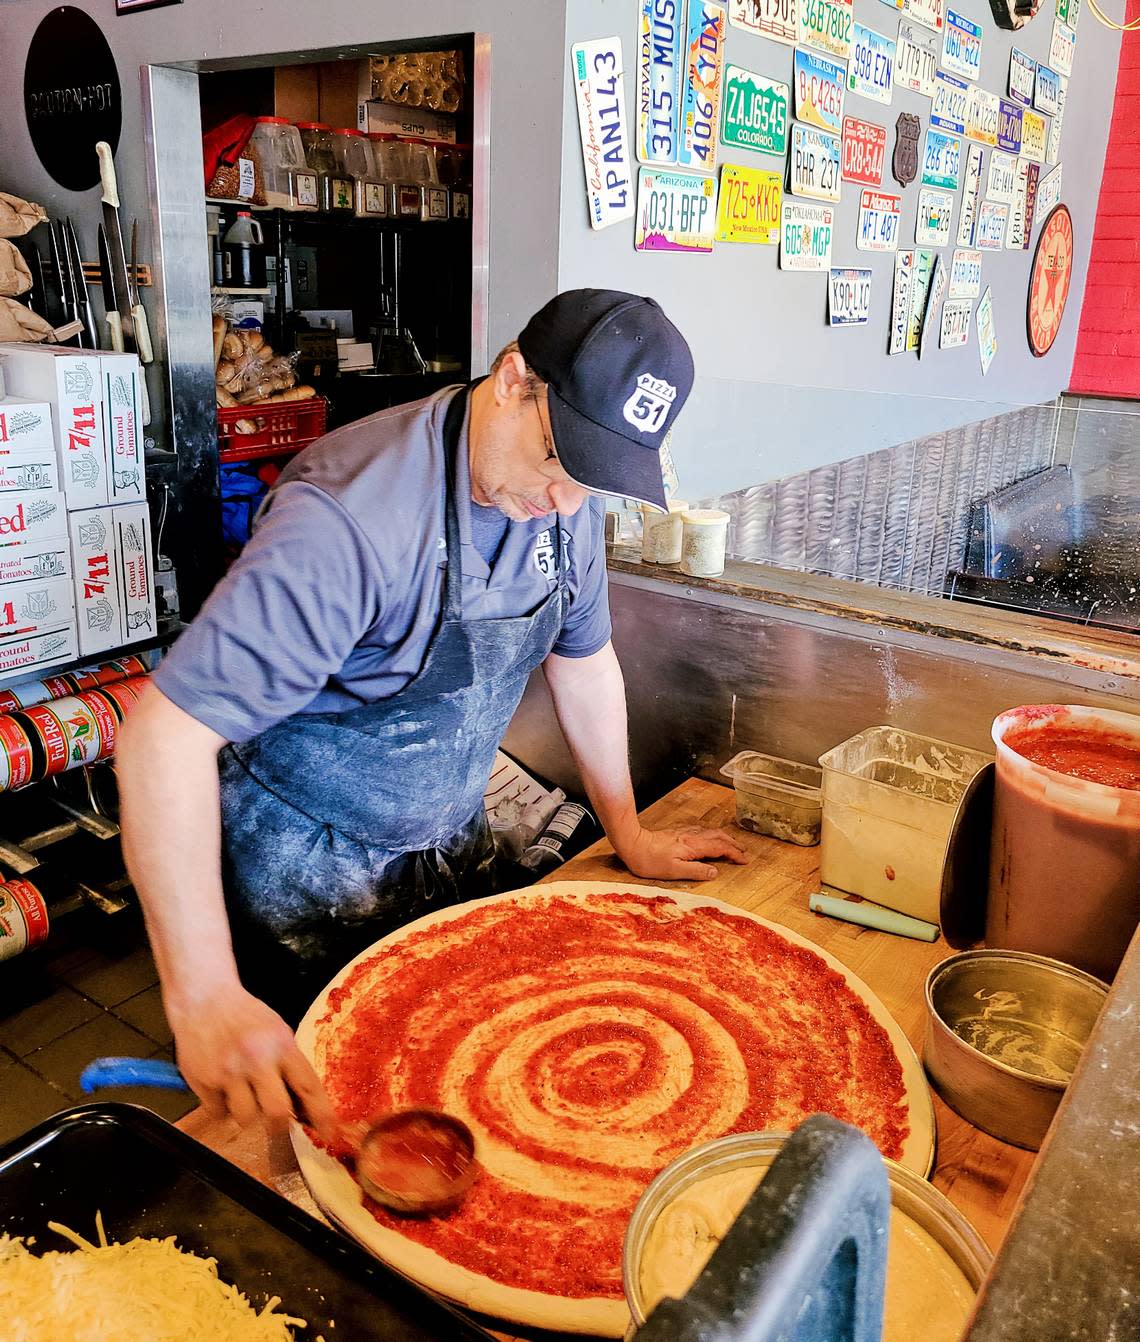 Pizza 51 owner Jason Pryor prepares a pizza to slide into the oven.